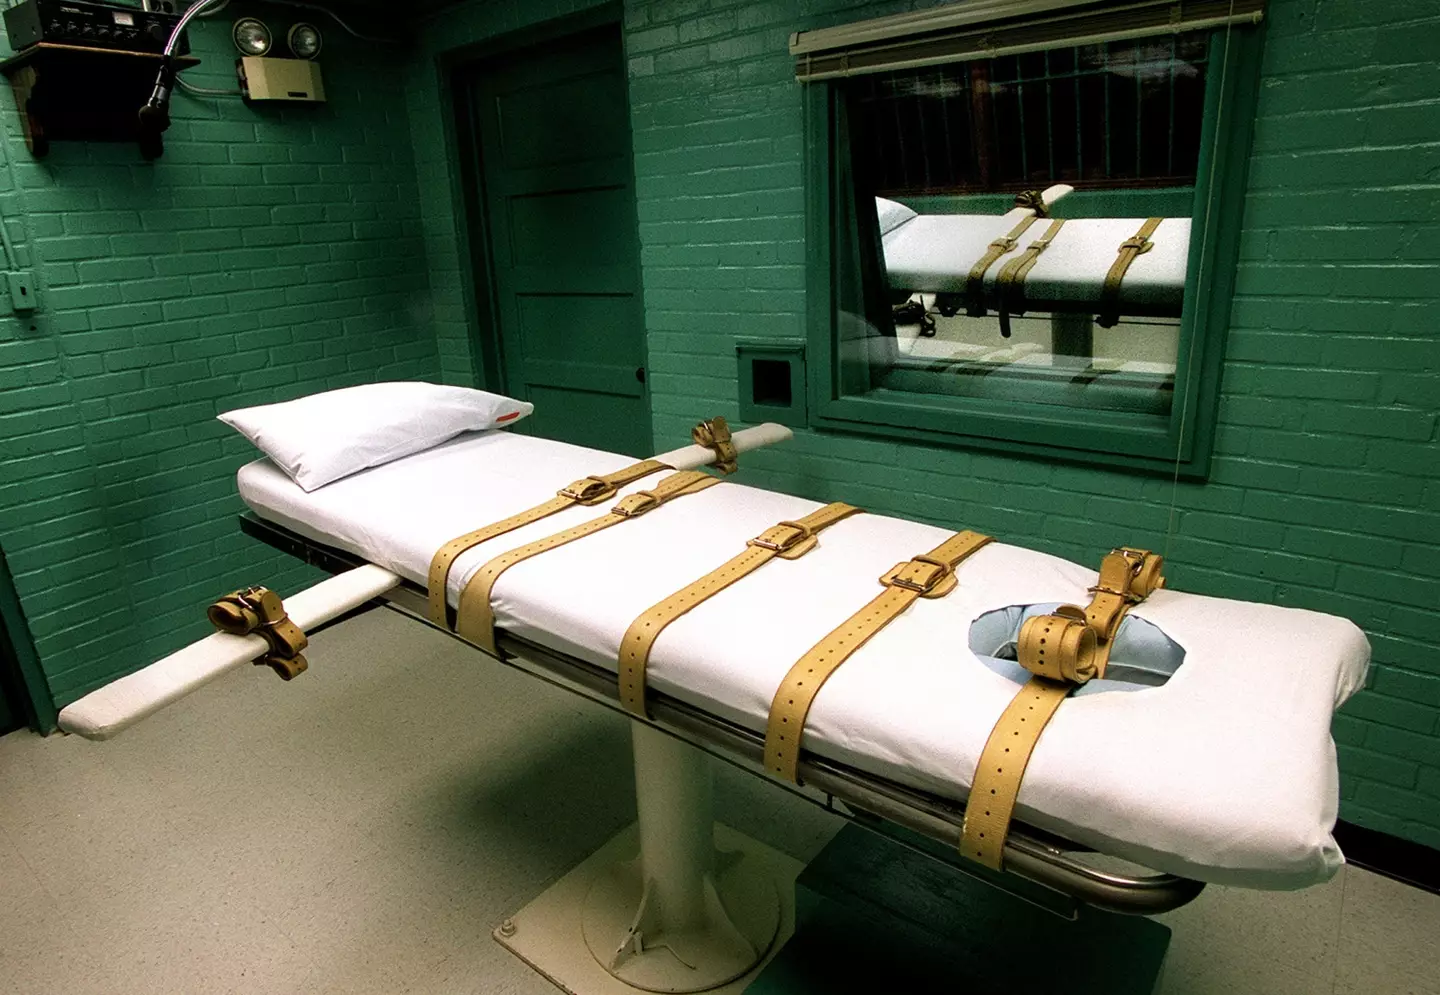 The killer died via lethal injection in Huntsville, Texas.